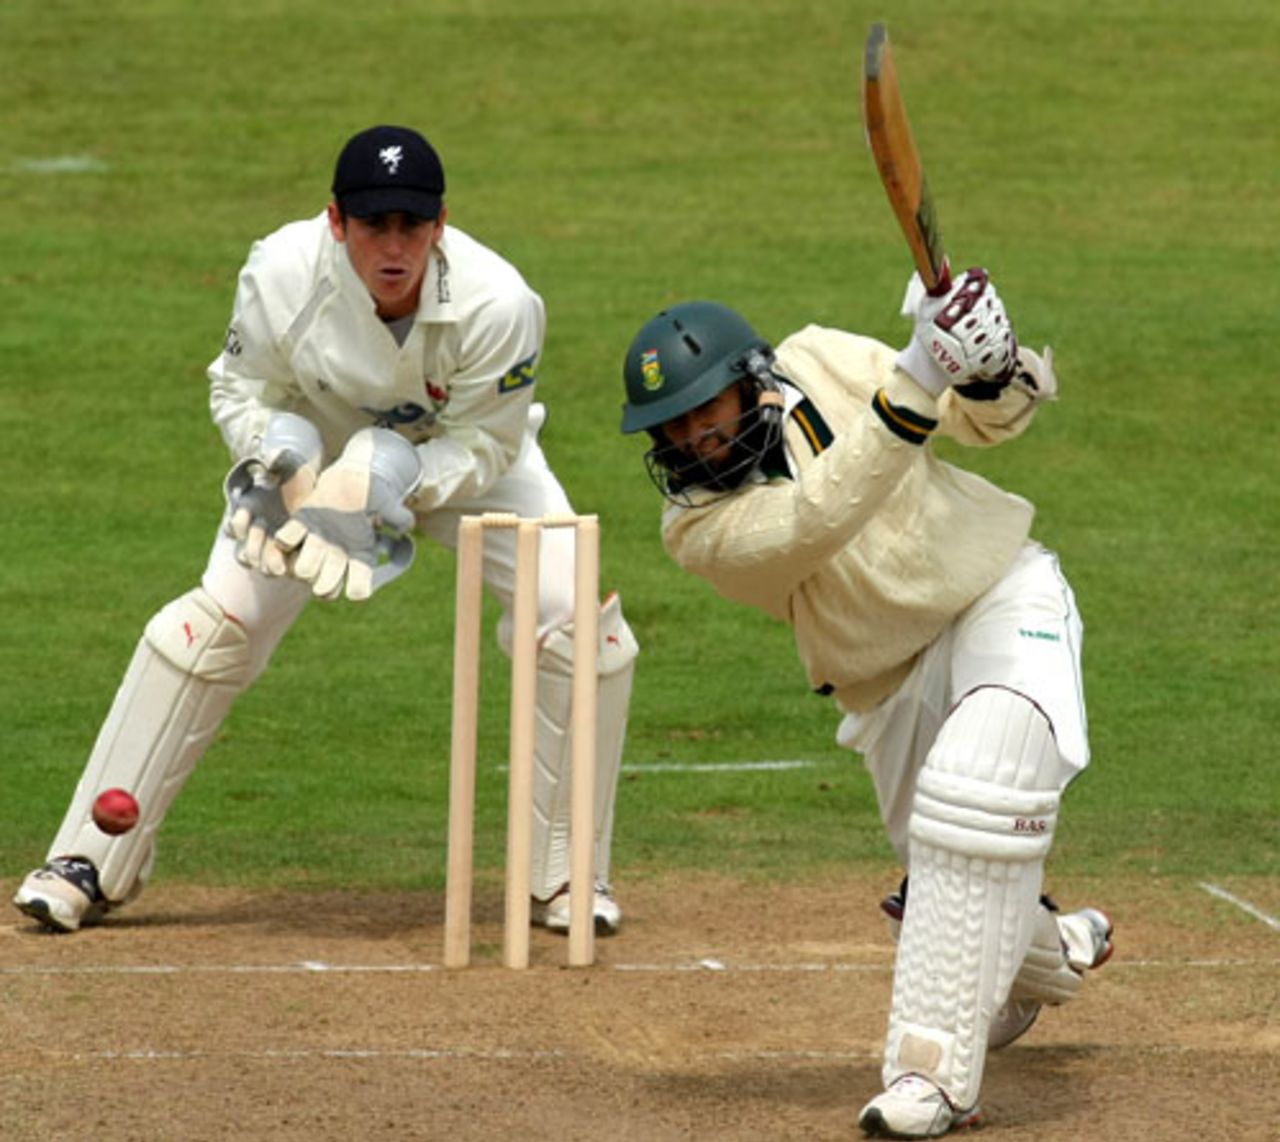 Hashim Amla makes room to play into the covers, Somerset v South Africans, tour match, 1st day, Taunton, June 29, 2008